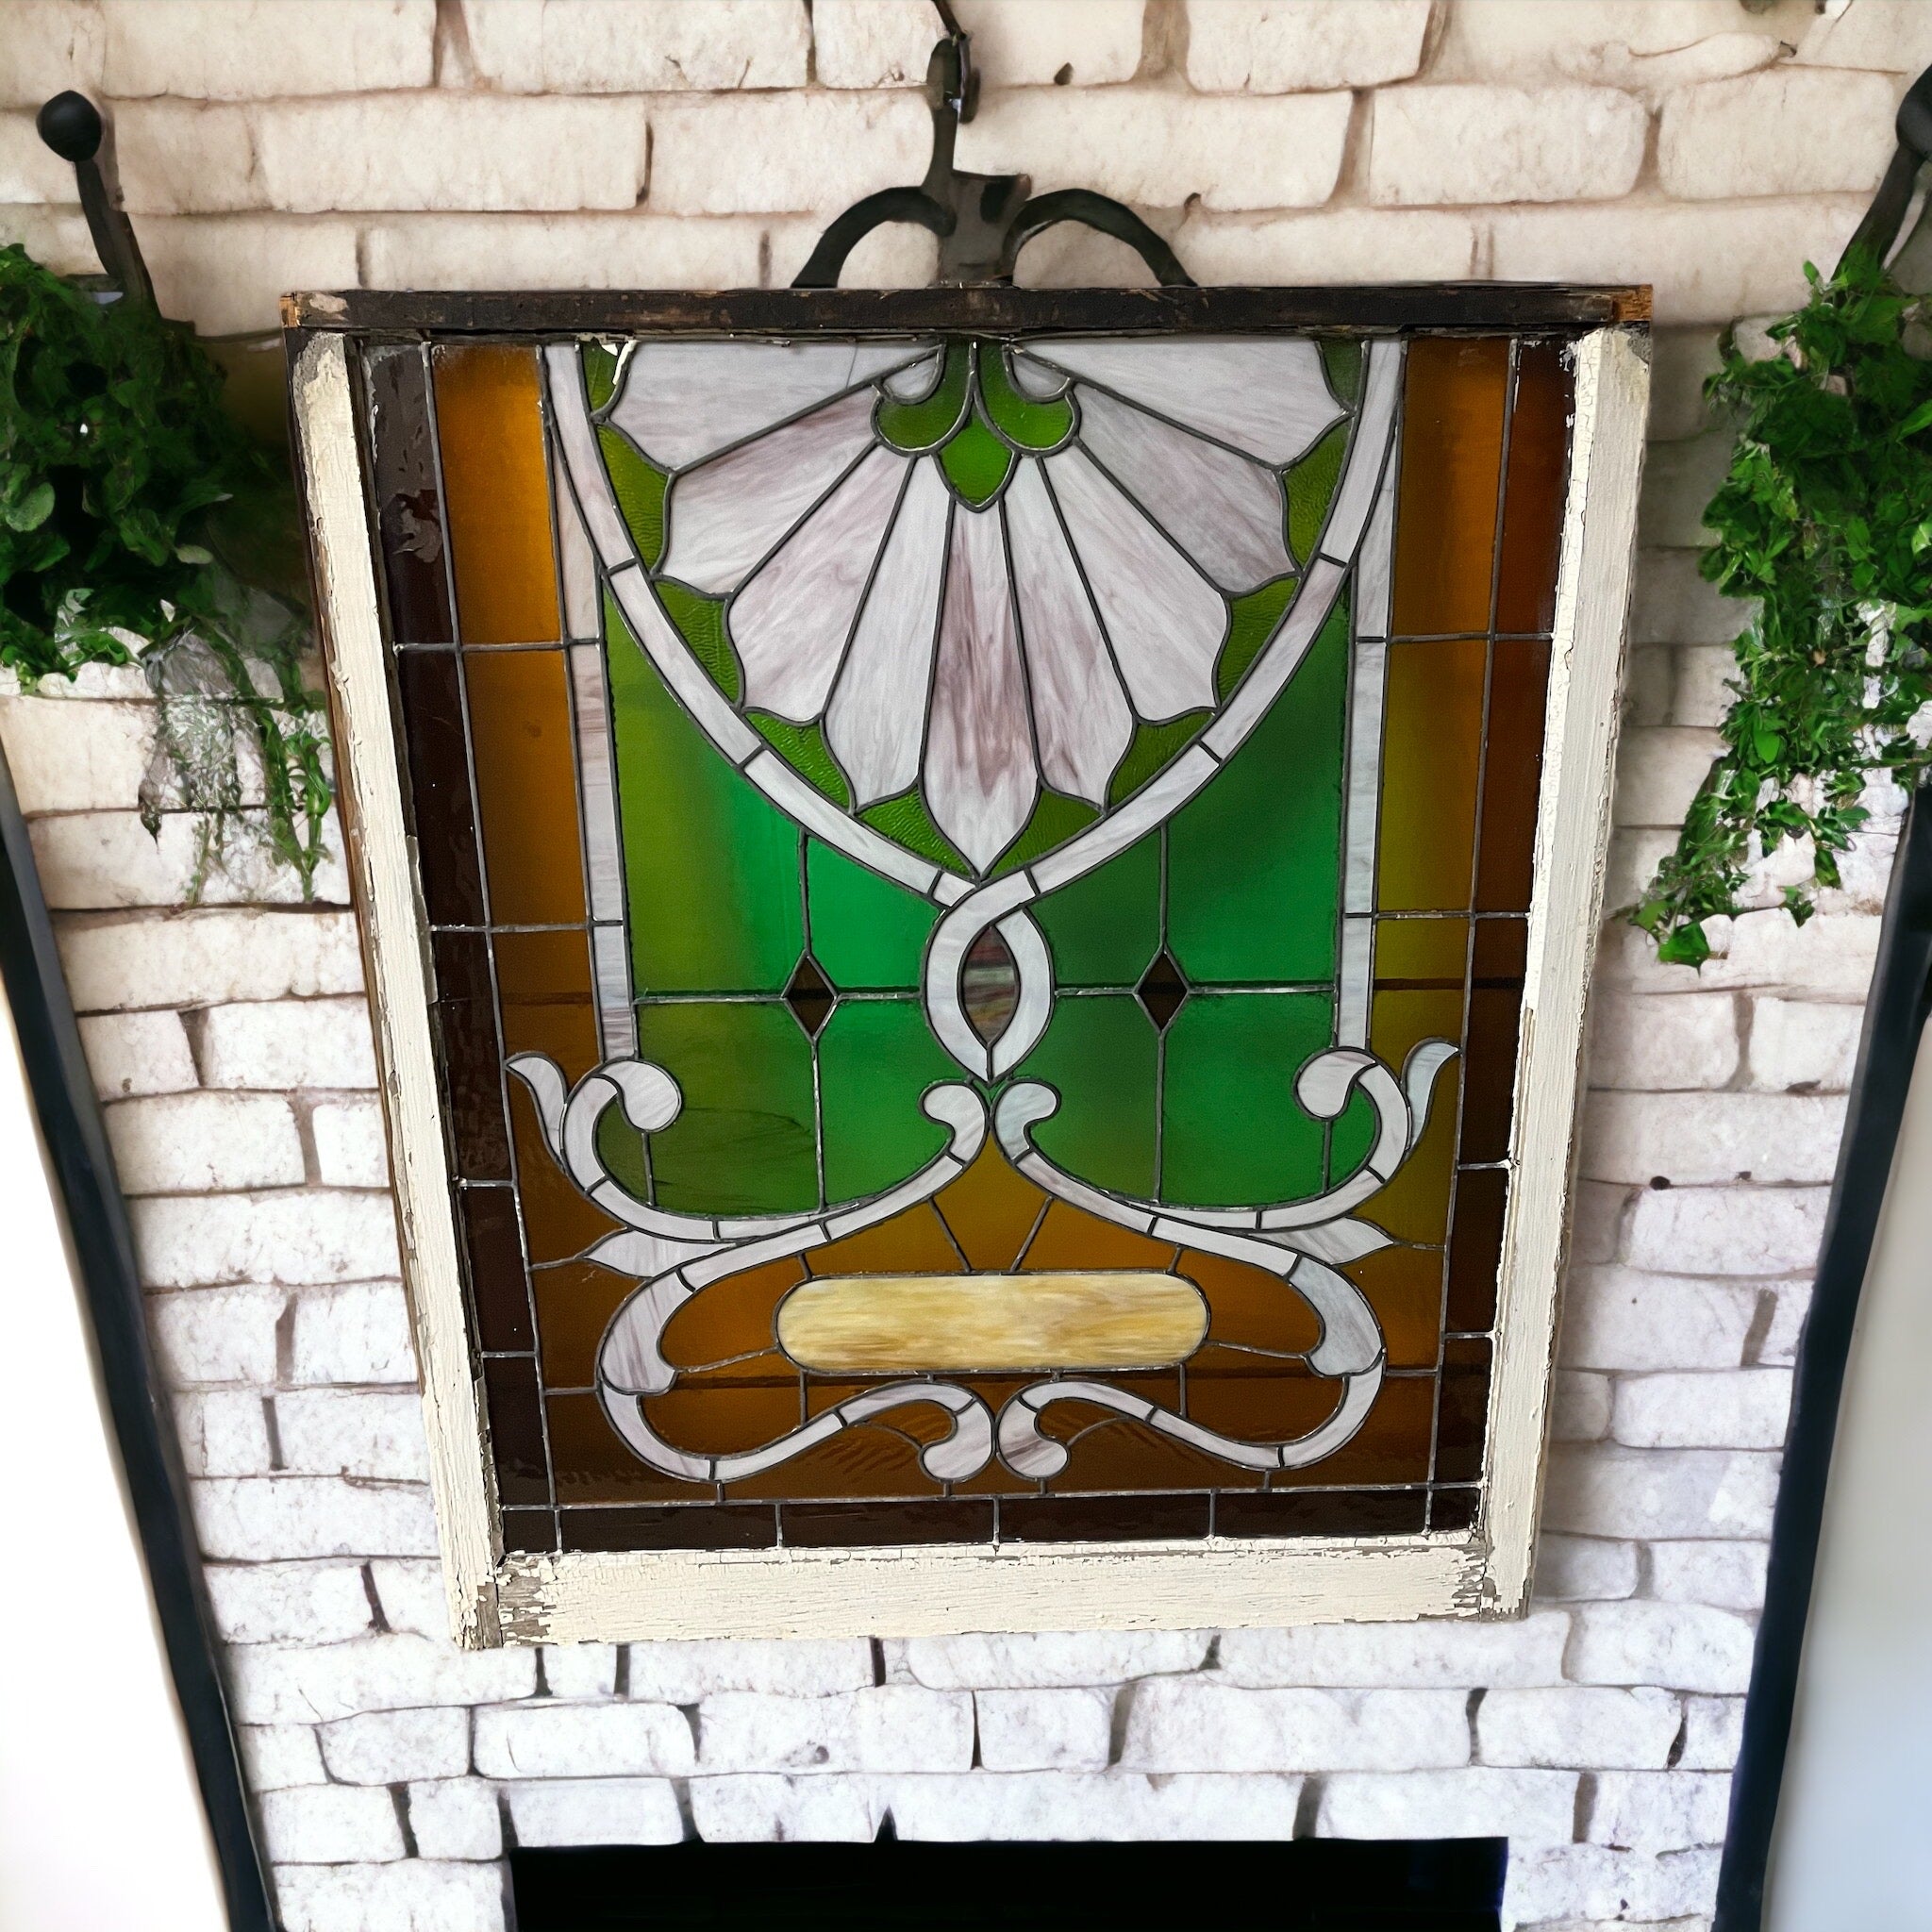 Large Antique Stained Glass Window